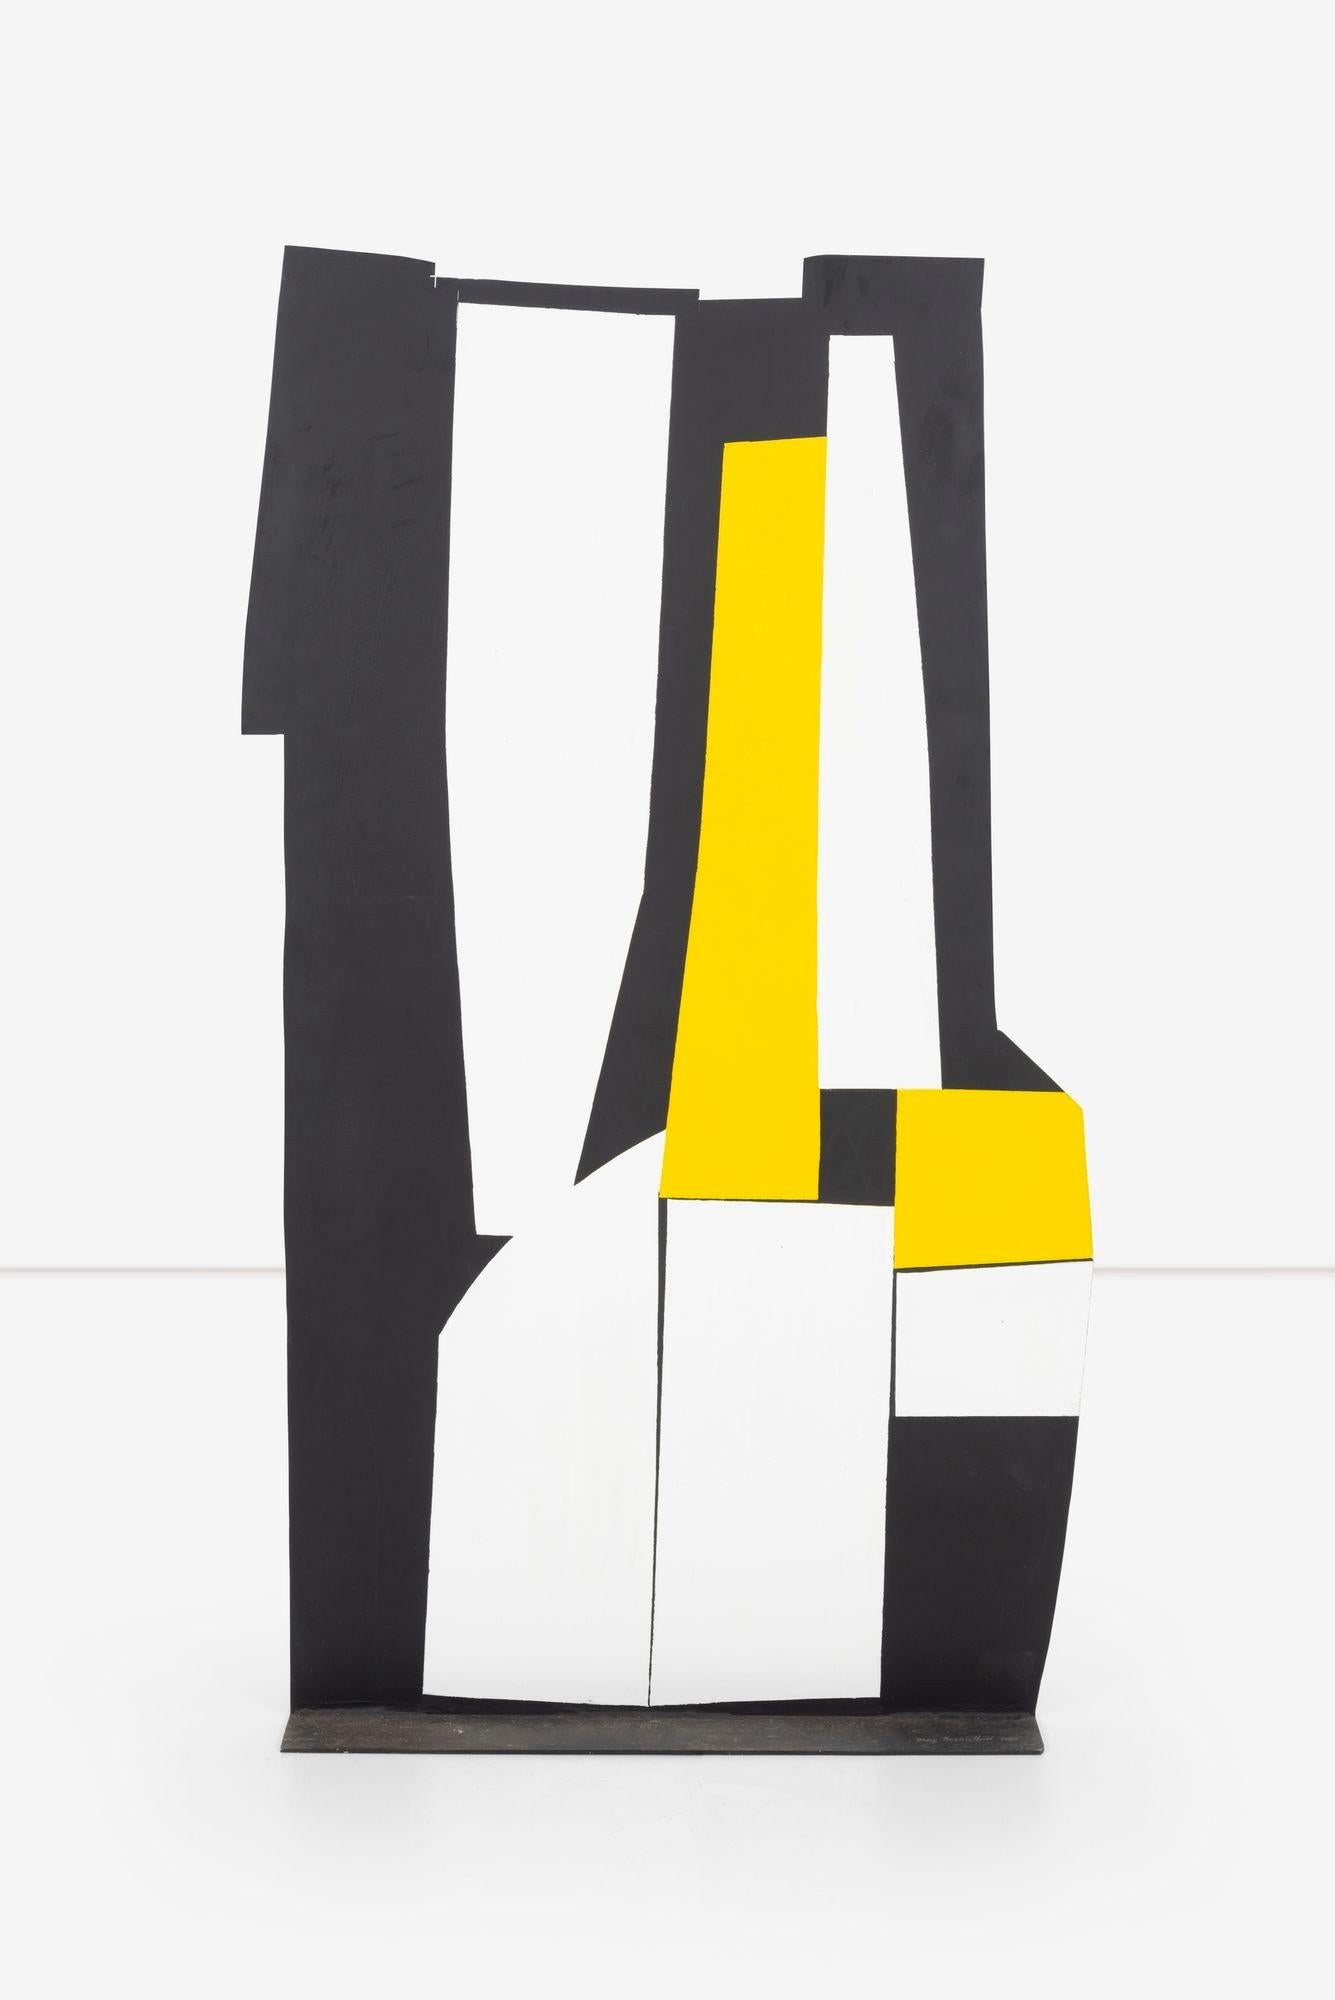 Tony Rosenthal Standing Black and White Plus Yellow Floor Sculpture 1987
Painted aluminum on both sides, signed Tony Rosenthal on the base
Dimensions:
60